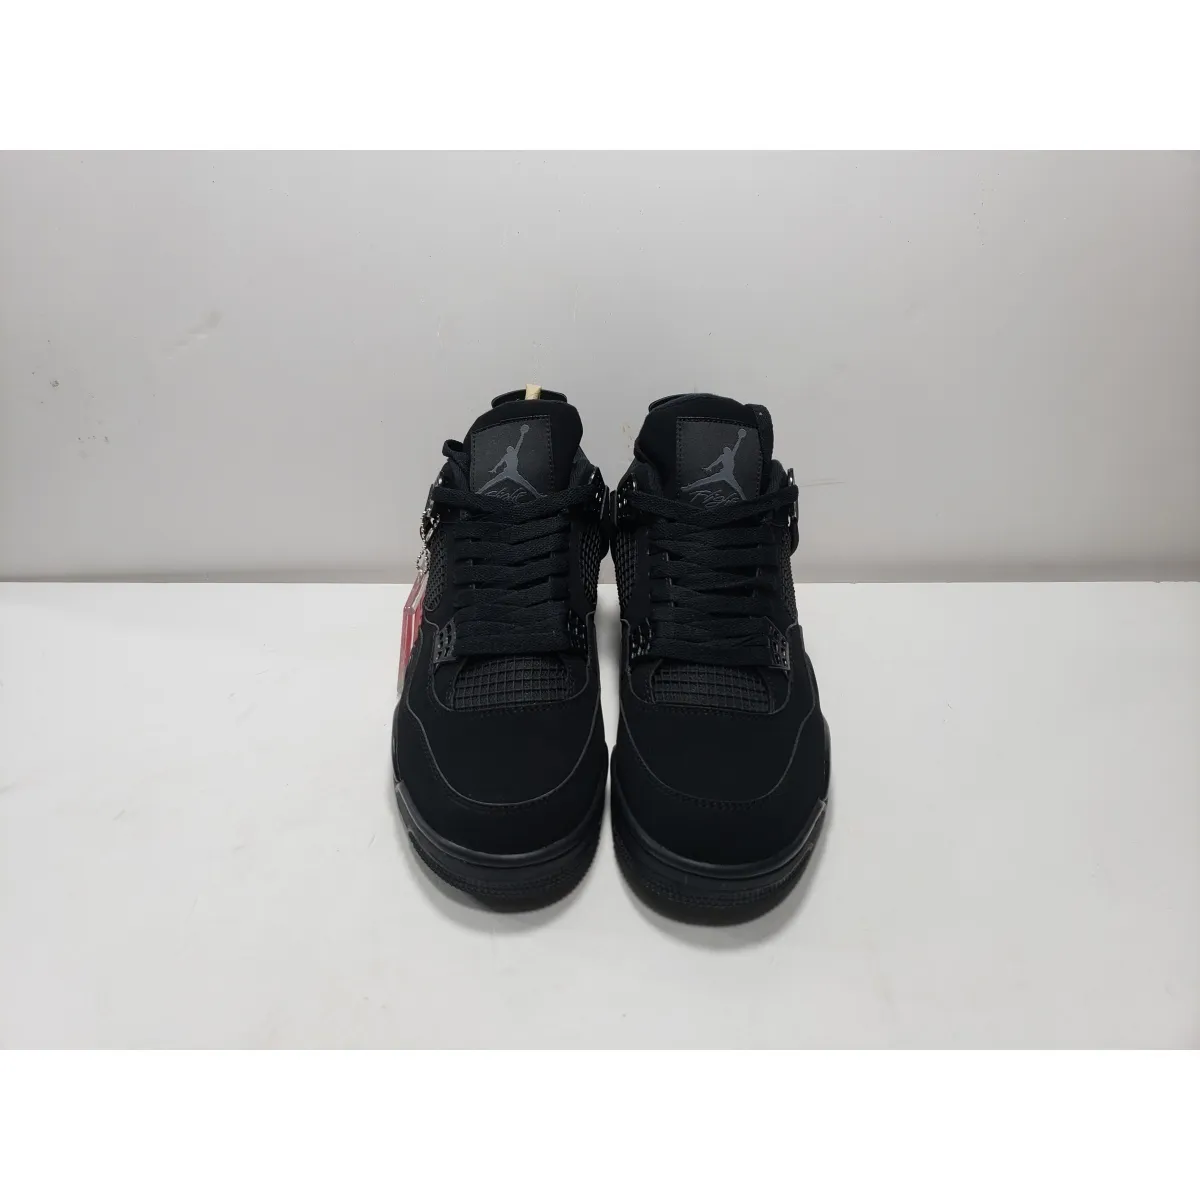 Show Some Shoes QC pictures